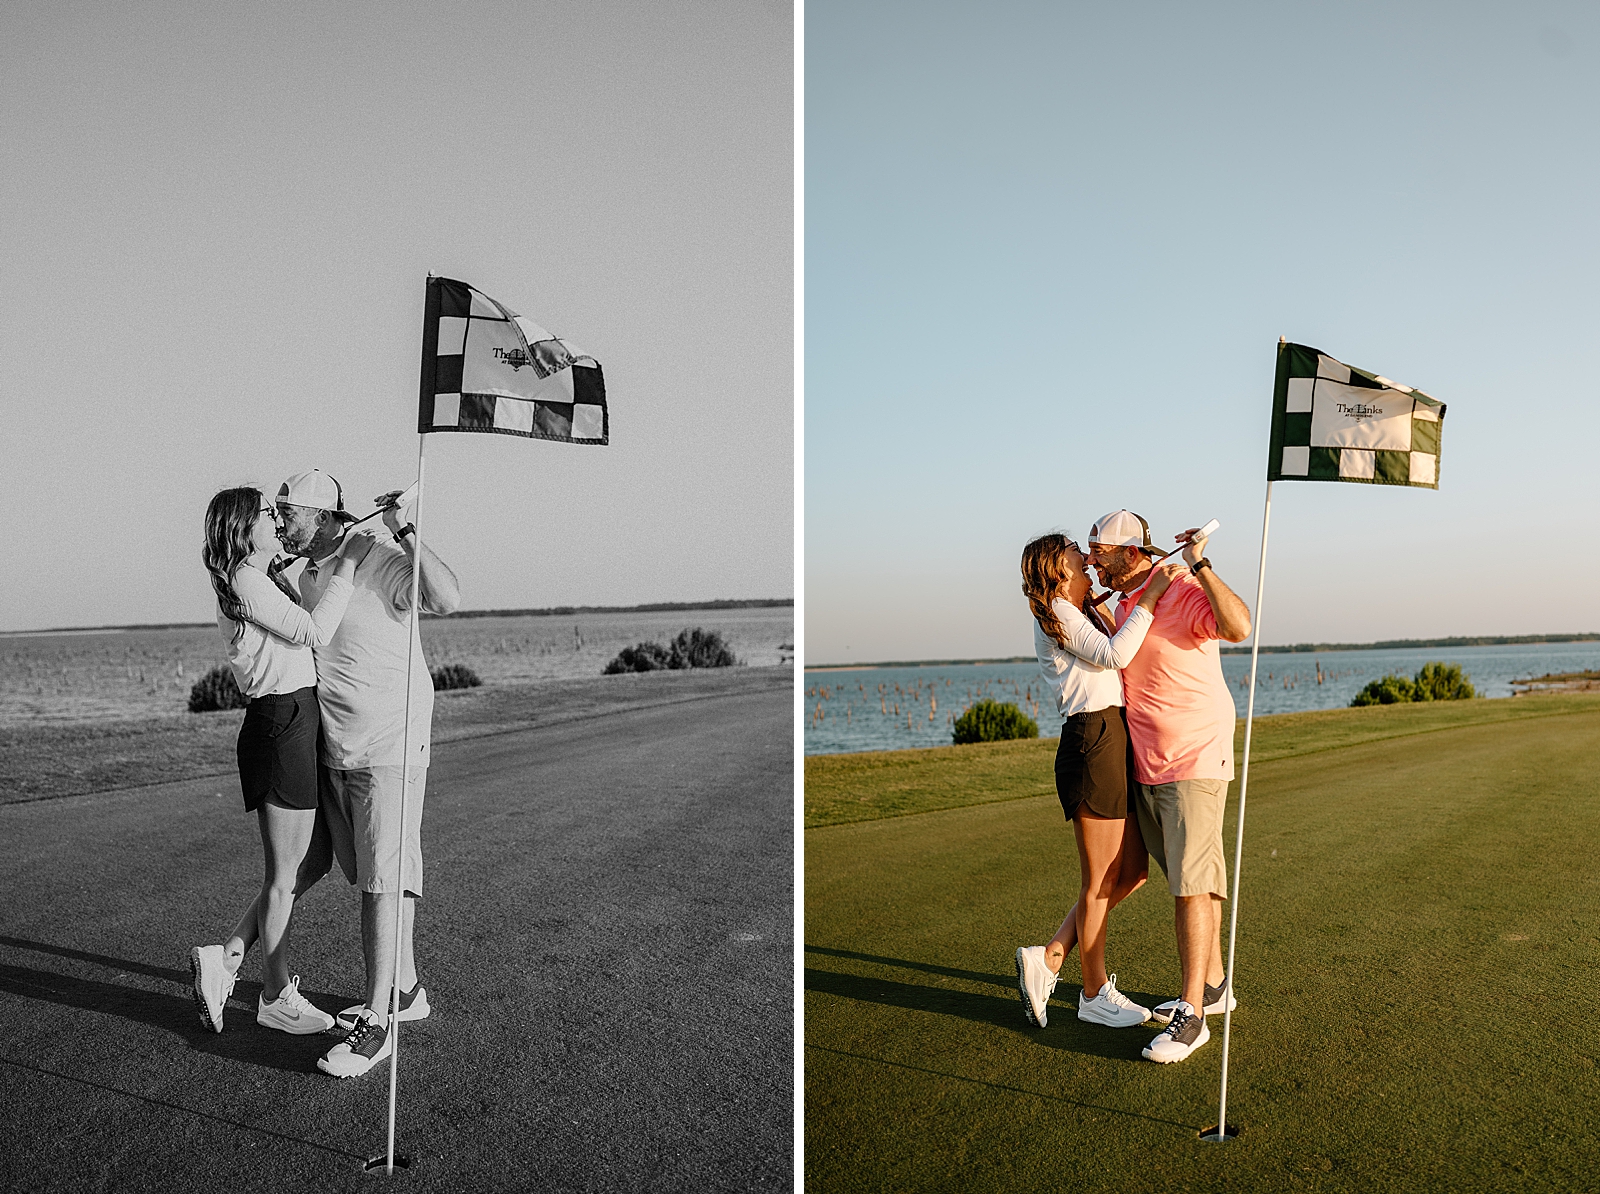 side by side images of couple kissing on golf course, one in black and white and one in color